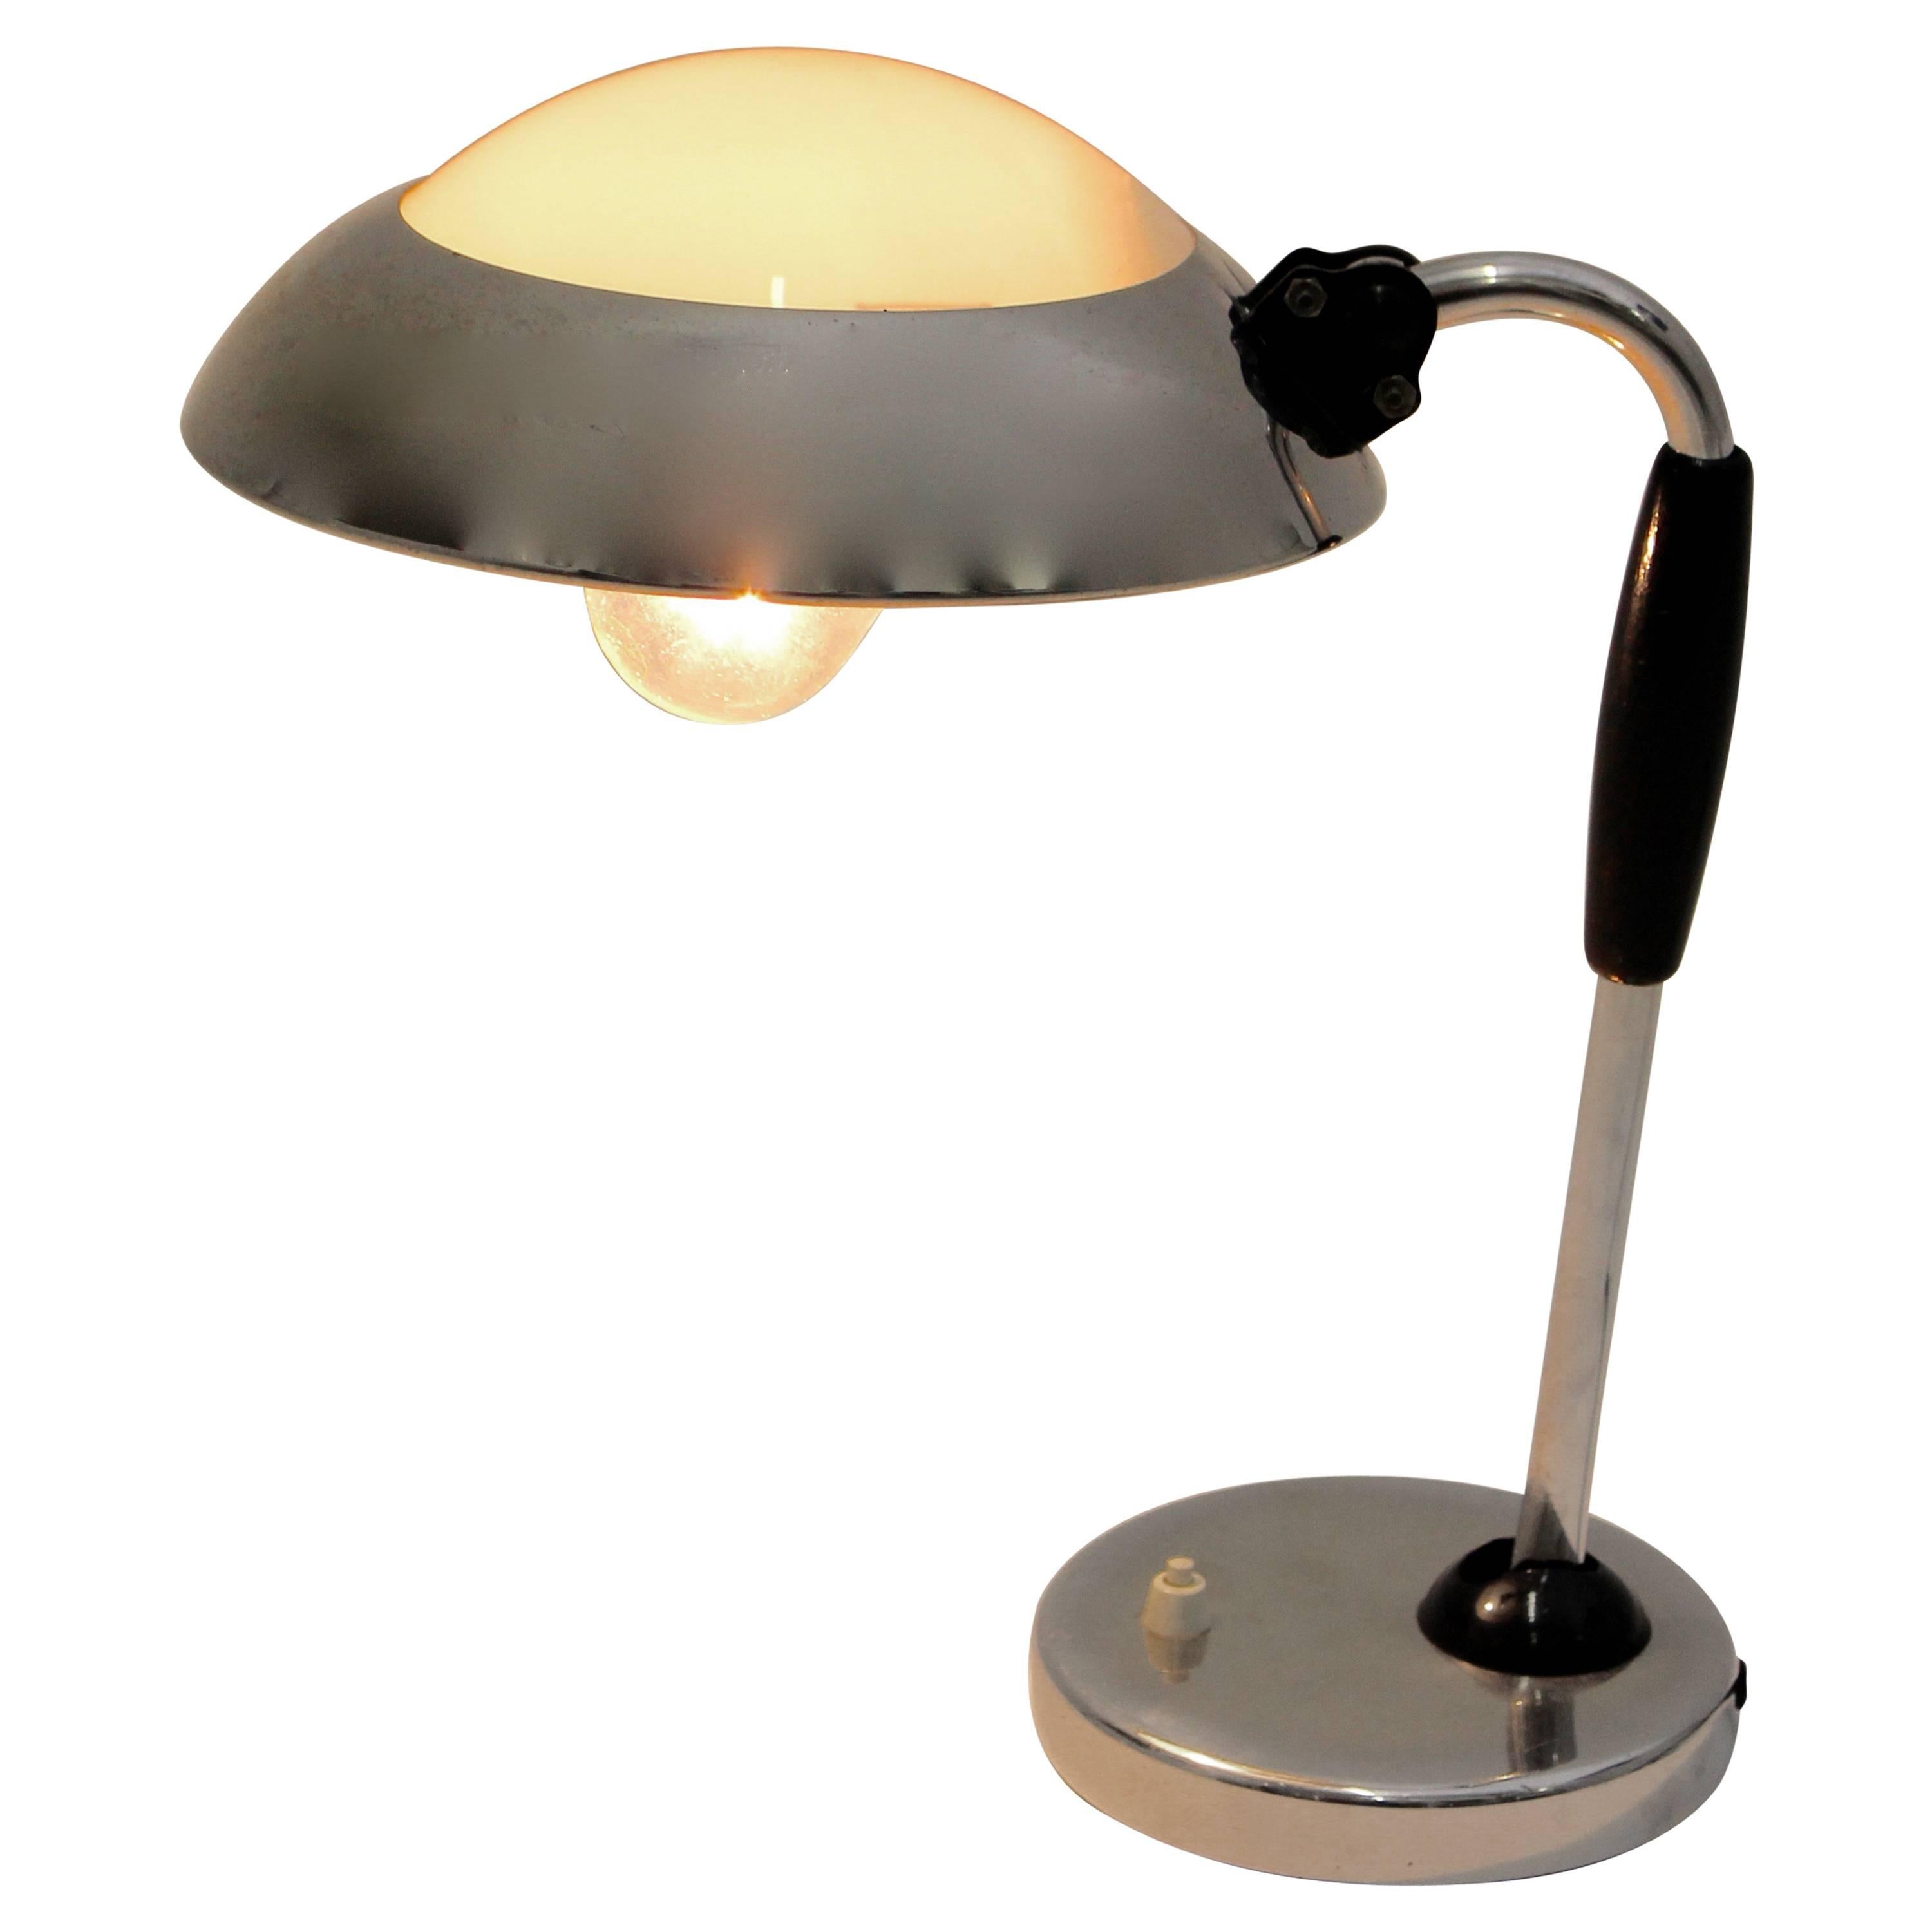 Bauhaus Vintage Metal Desk Lamp Attributed to Christian Dell 1930s Germany